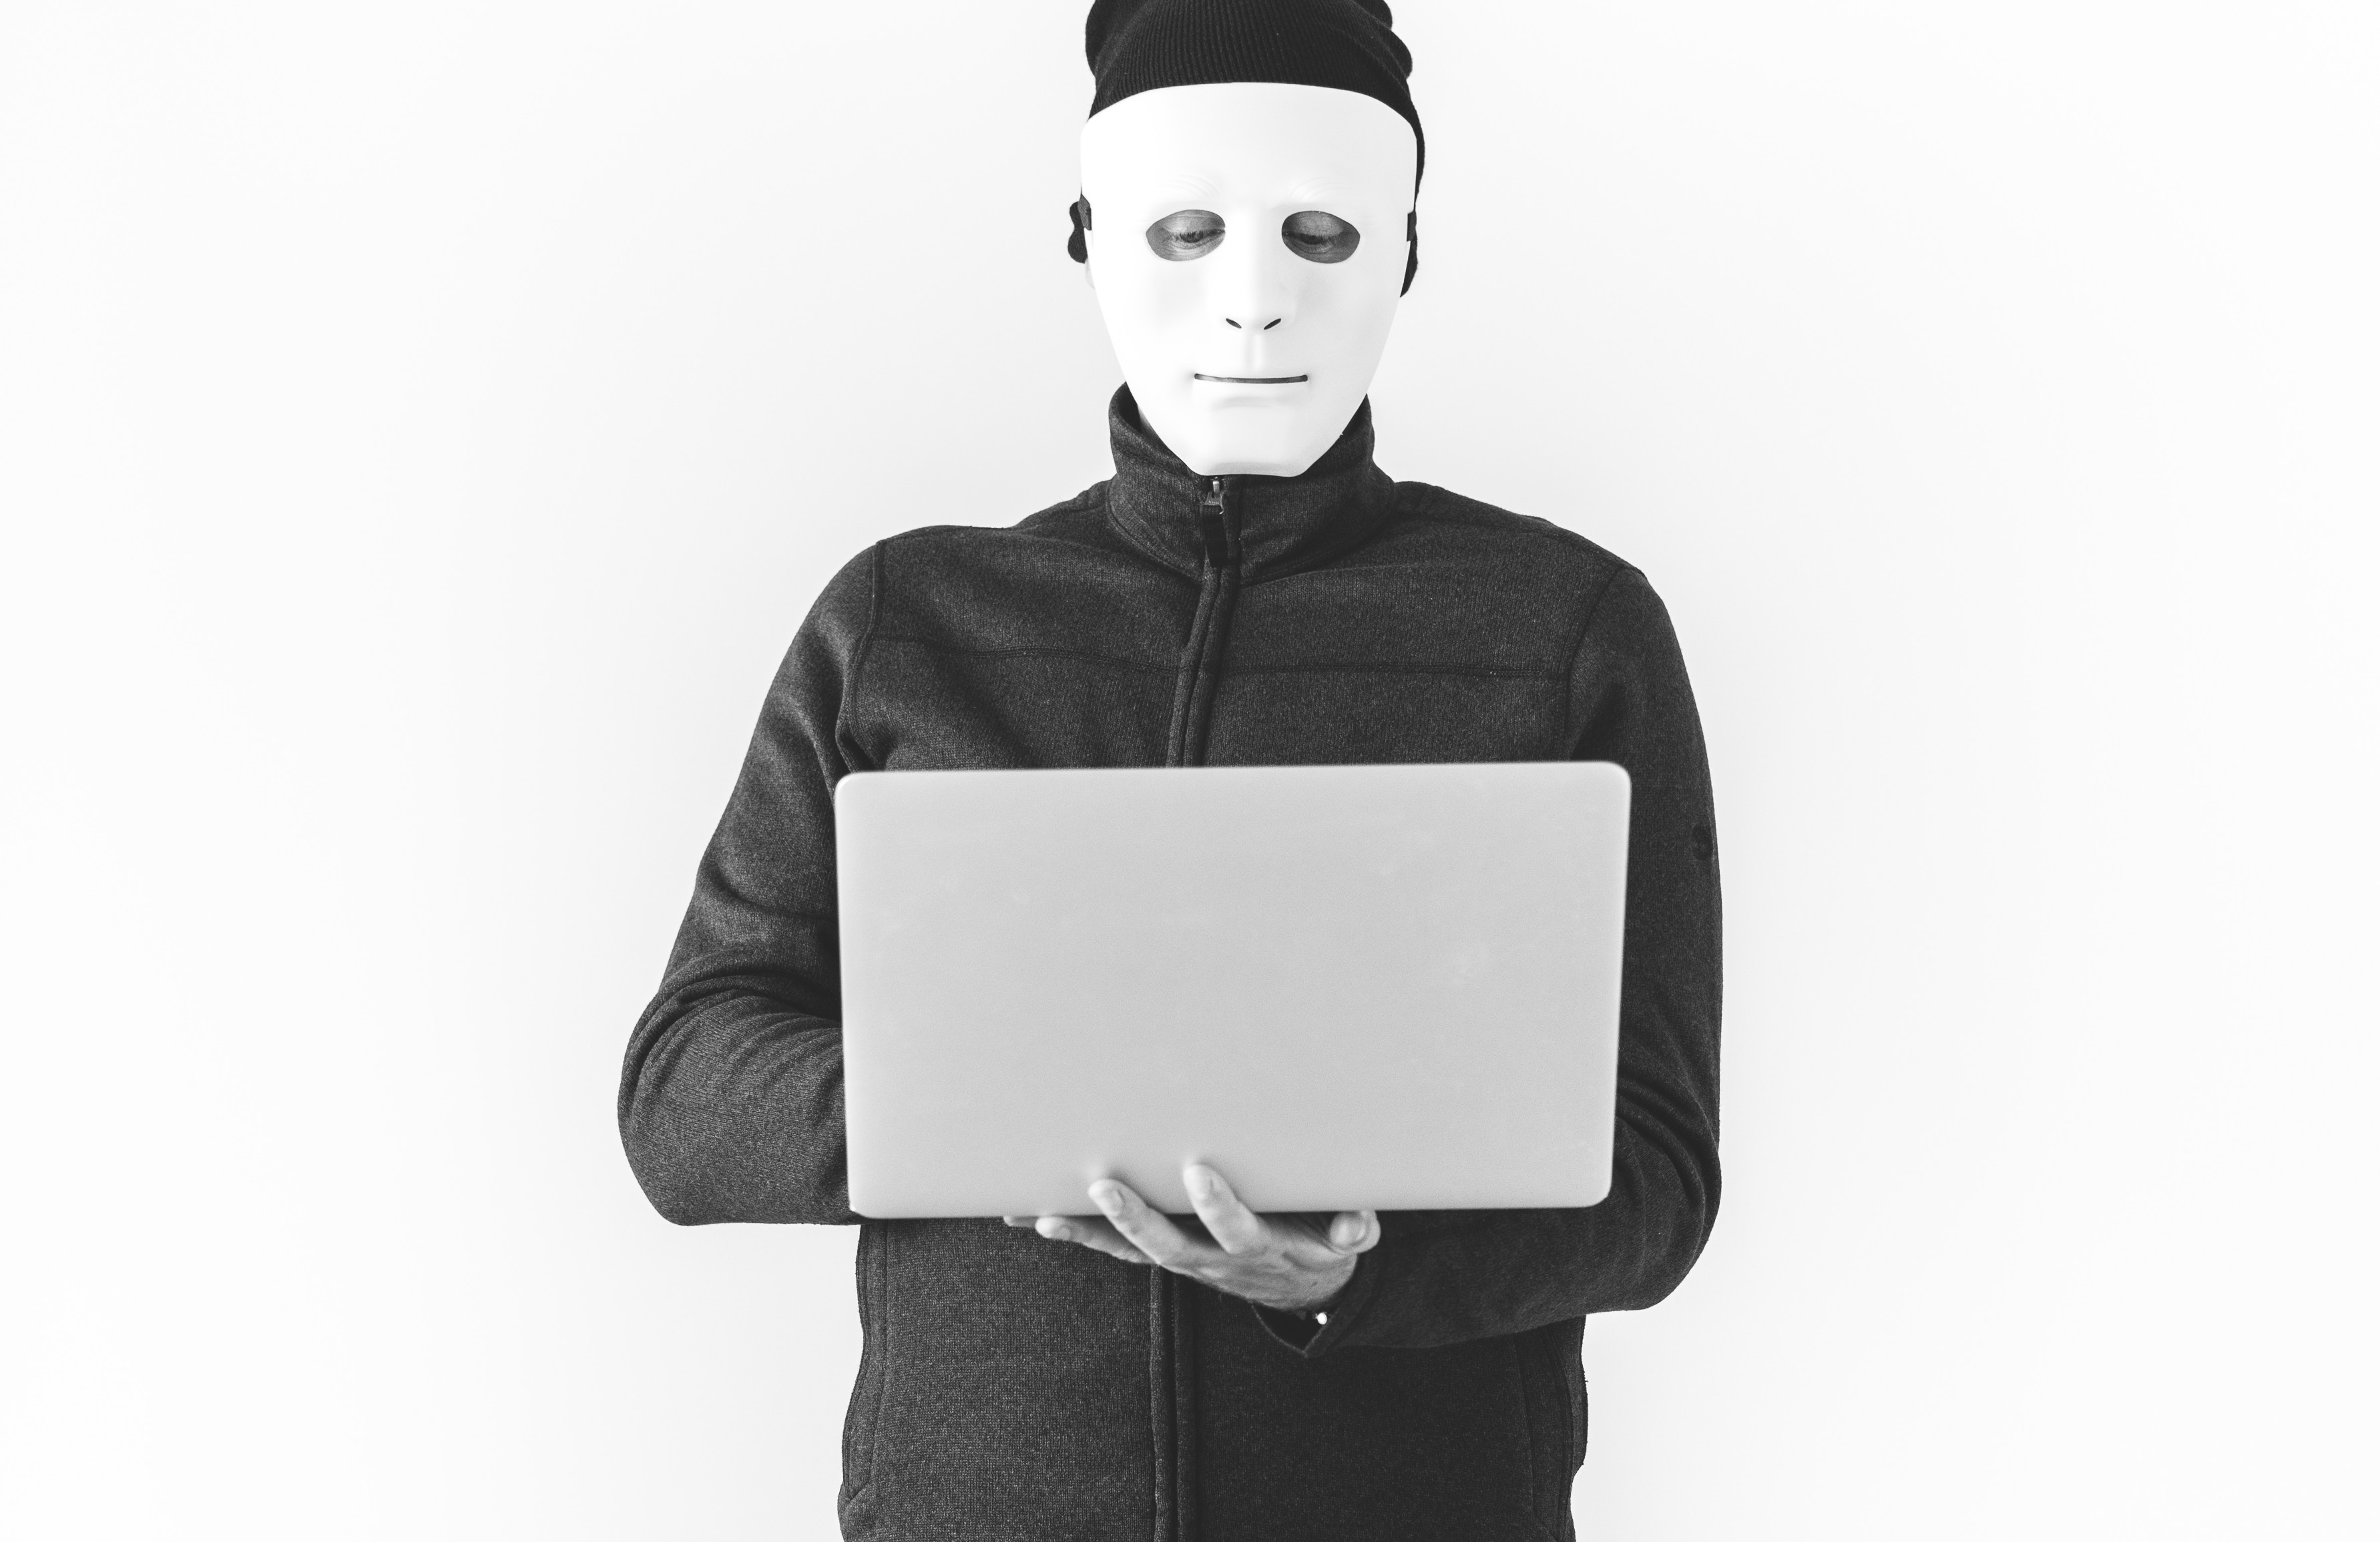 Black and white photo of a man in a Jason white hockey mask wearing a black long sleeve turtleneck and black beanie suspiciously looks at a laptop